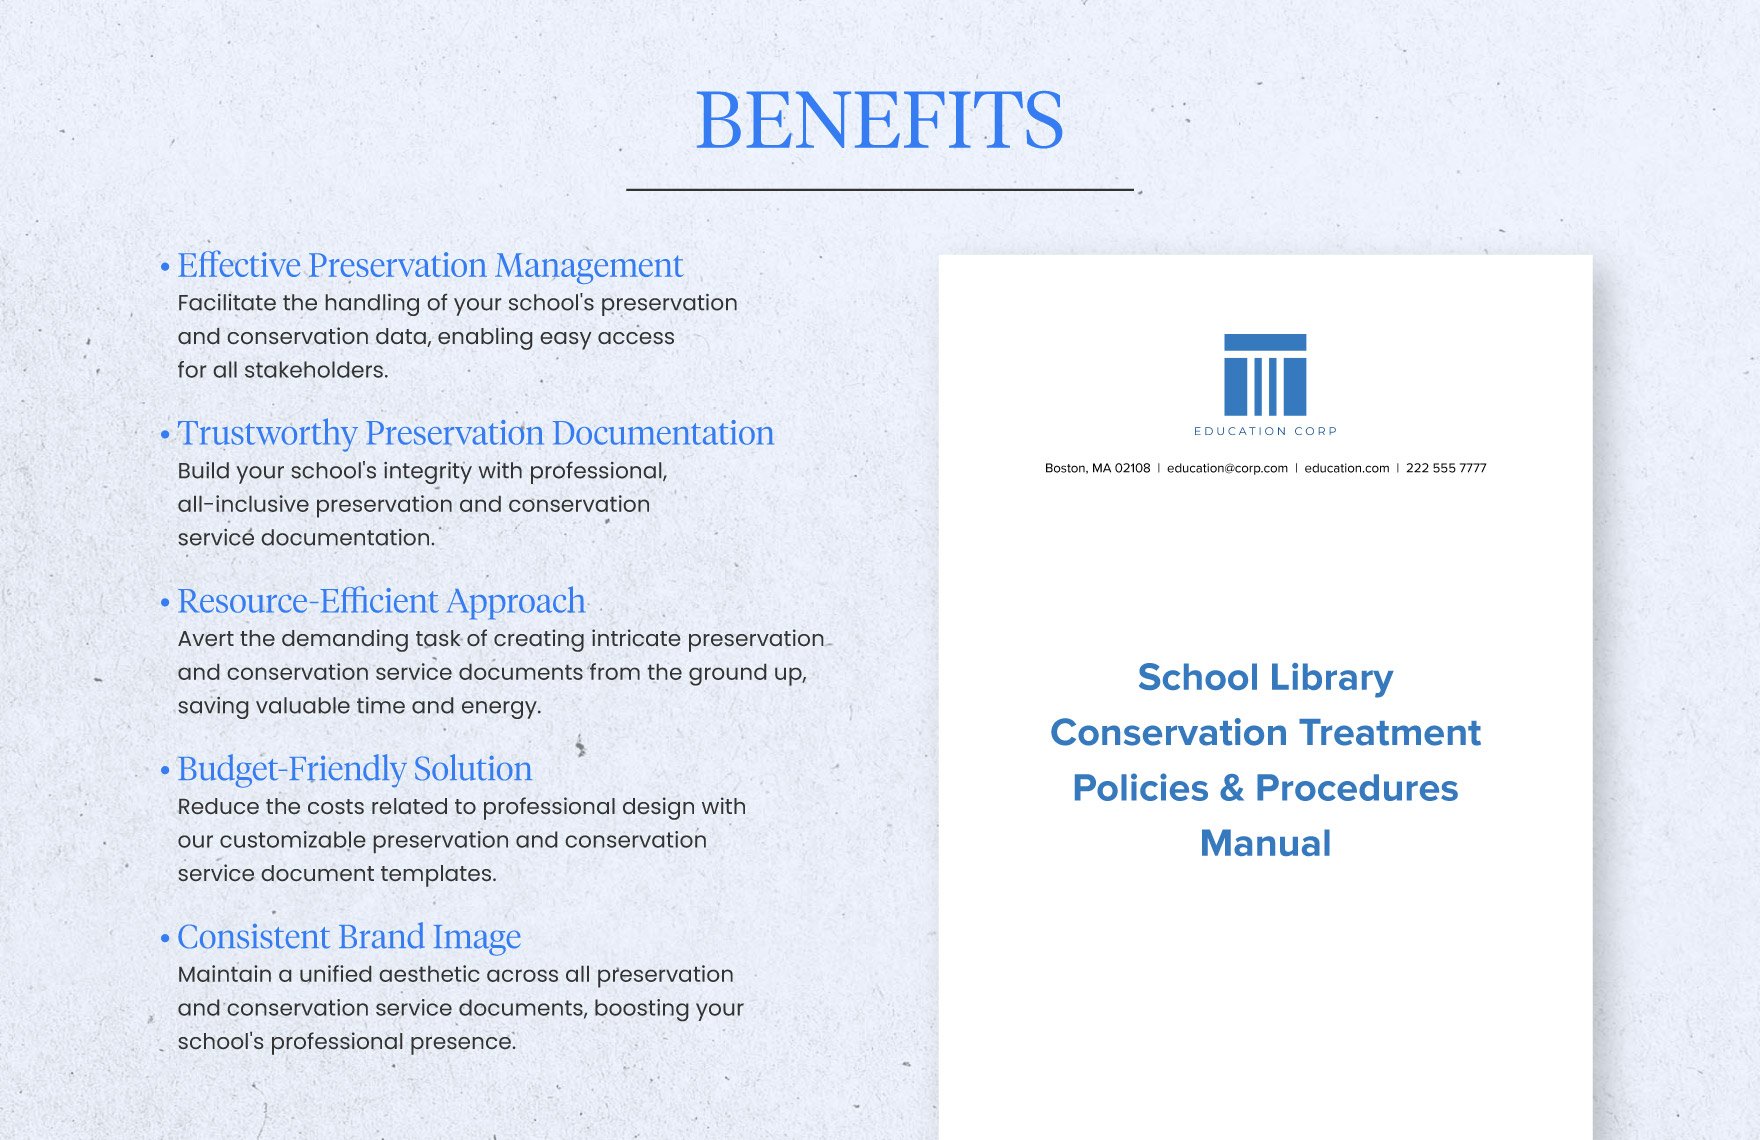 School Library Conservation Treatment Policies and Procedures Manual Template